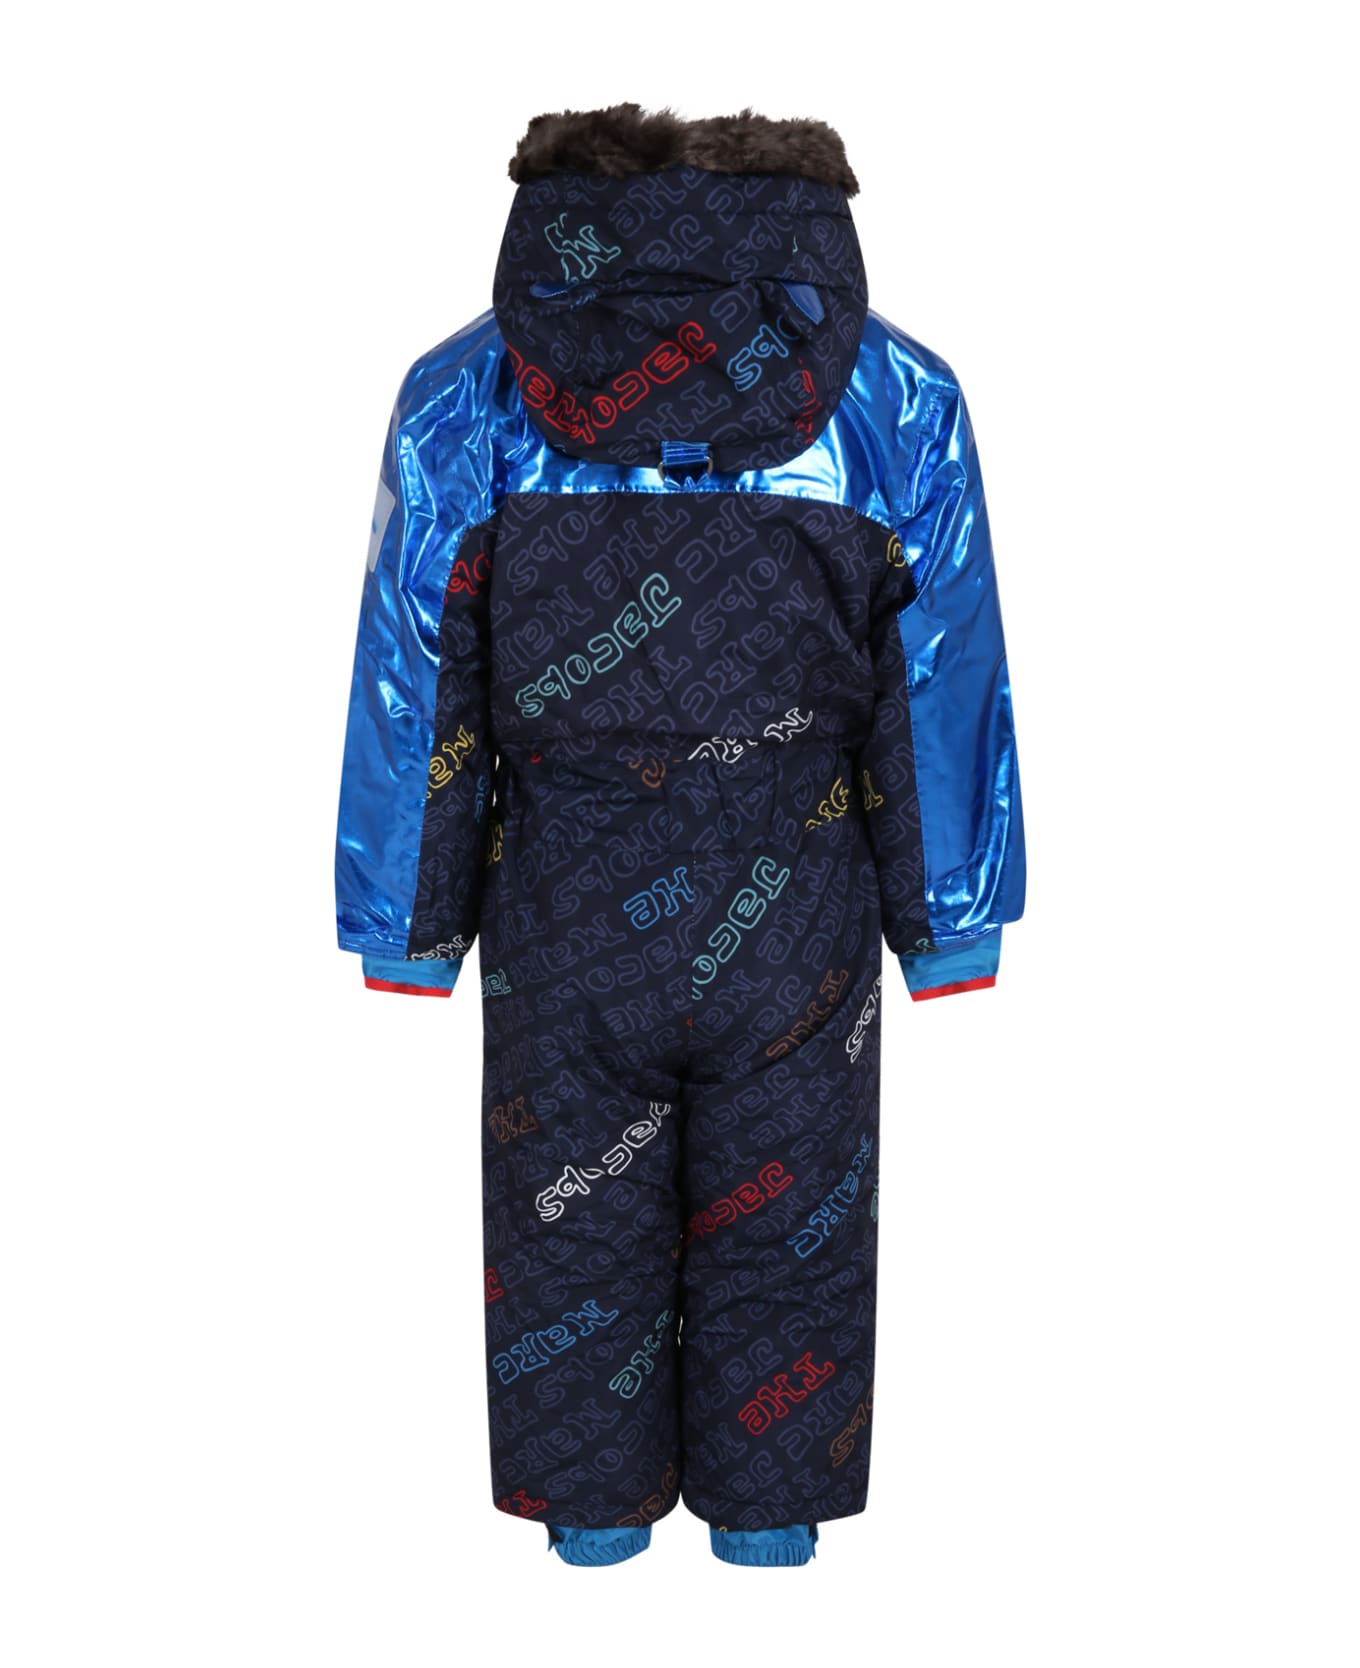 Marc Jacobs Blue Snow Suit For Boy With Logos - Blue